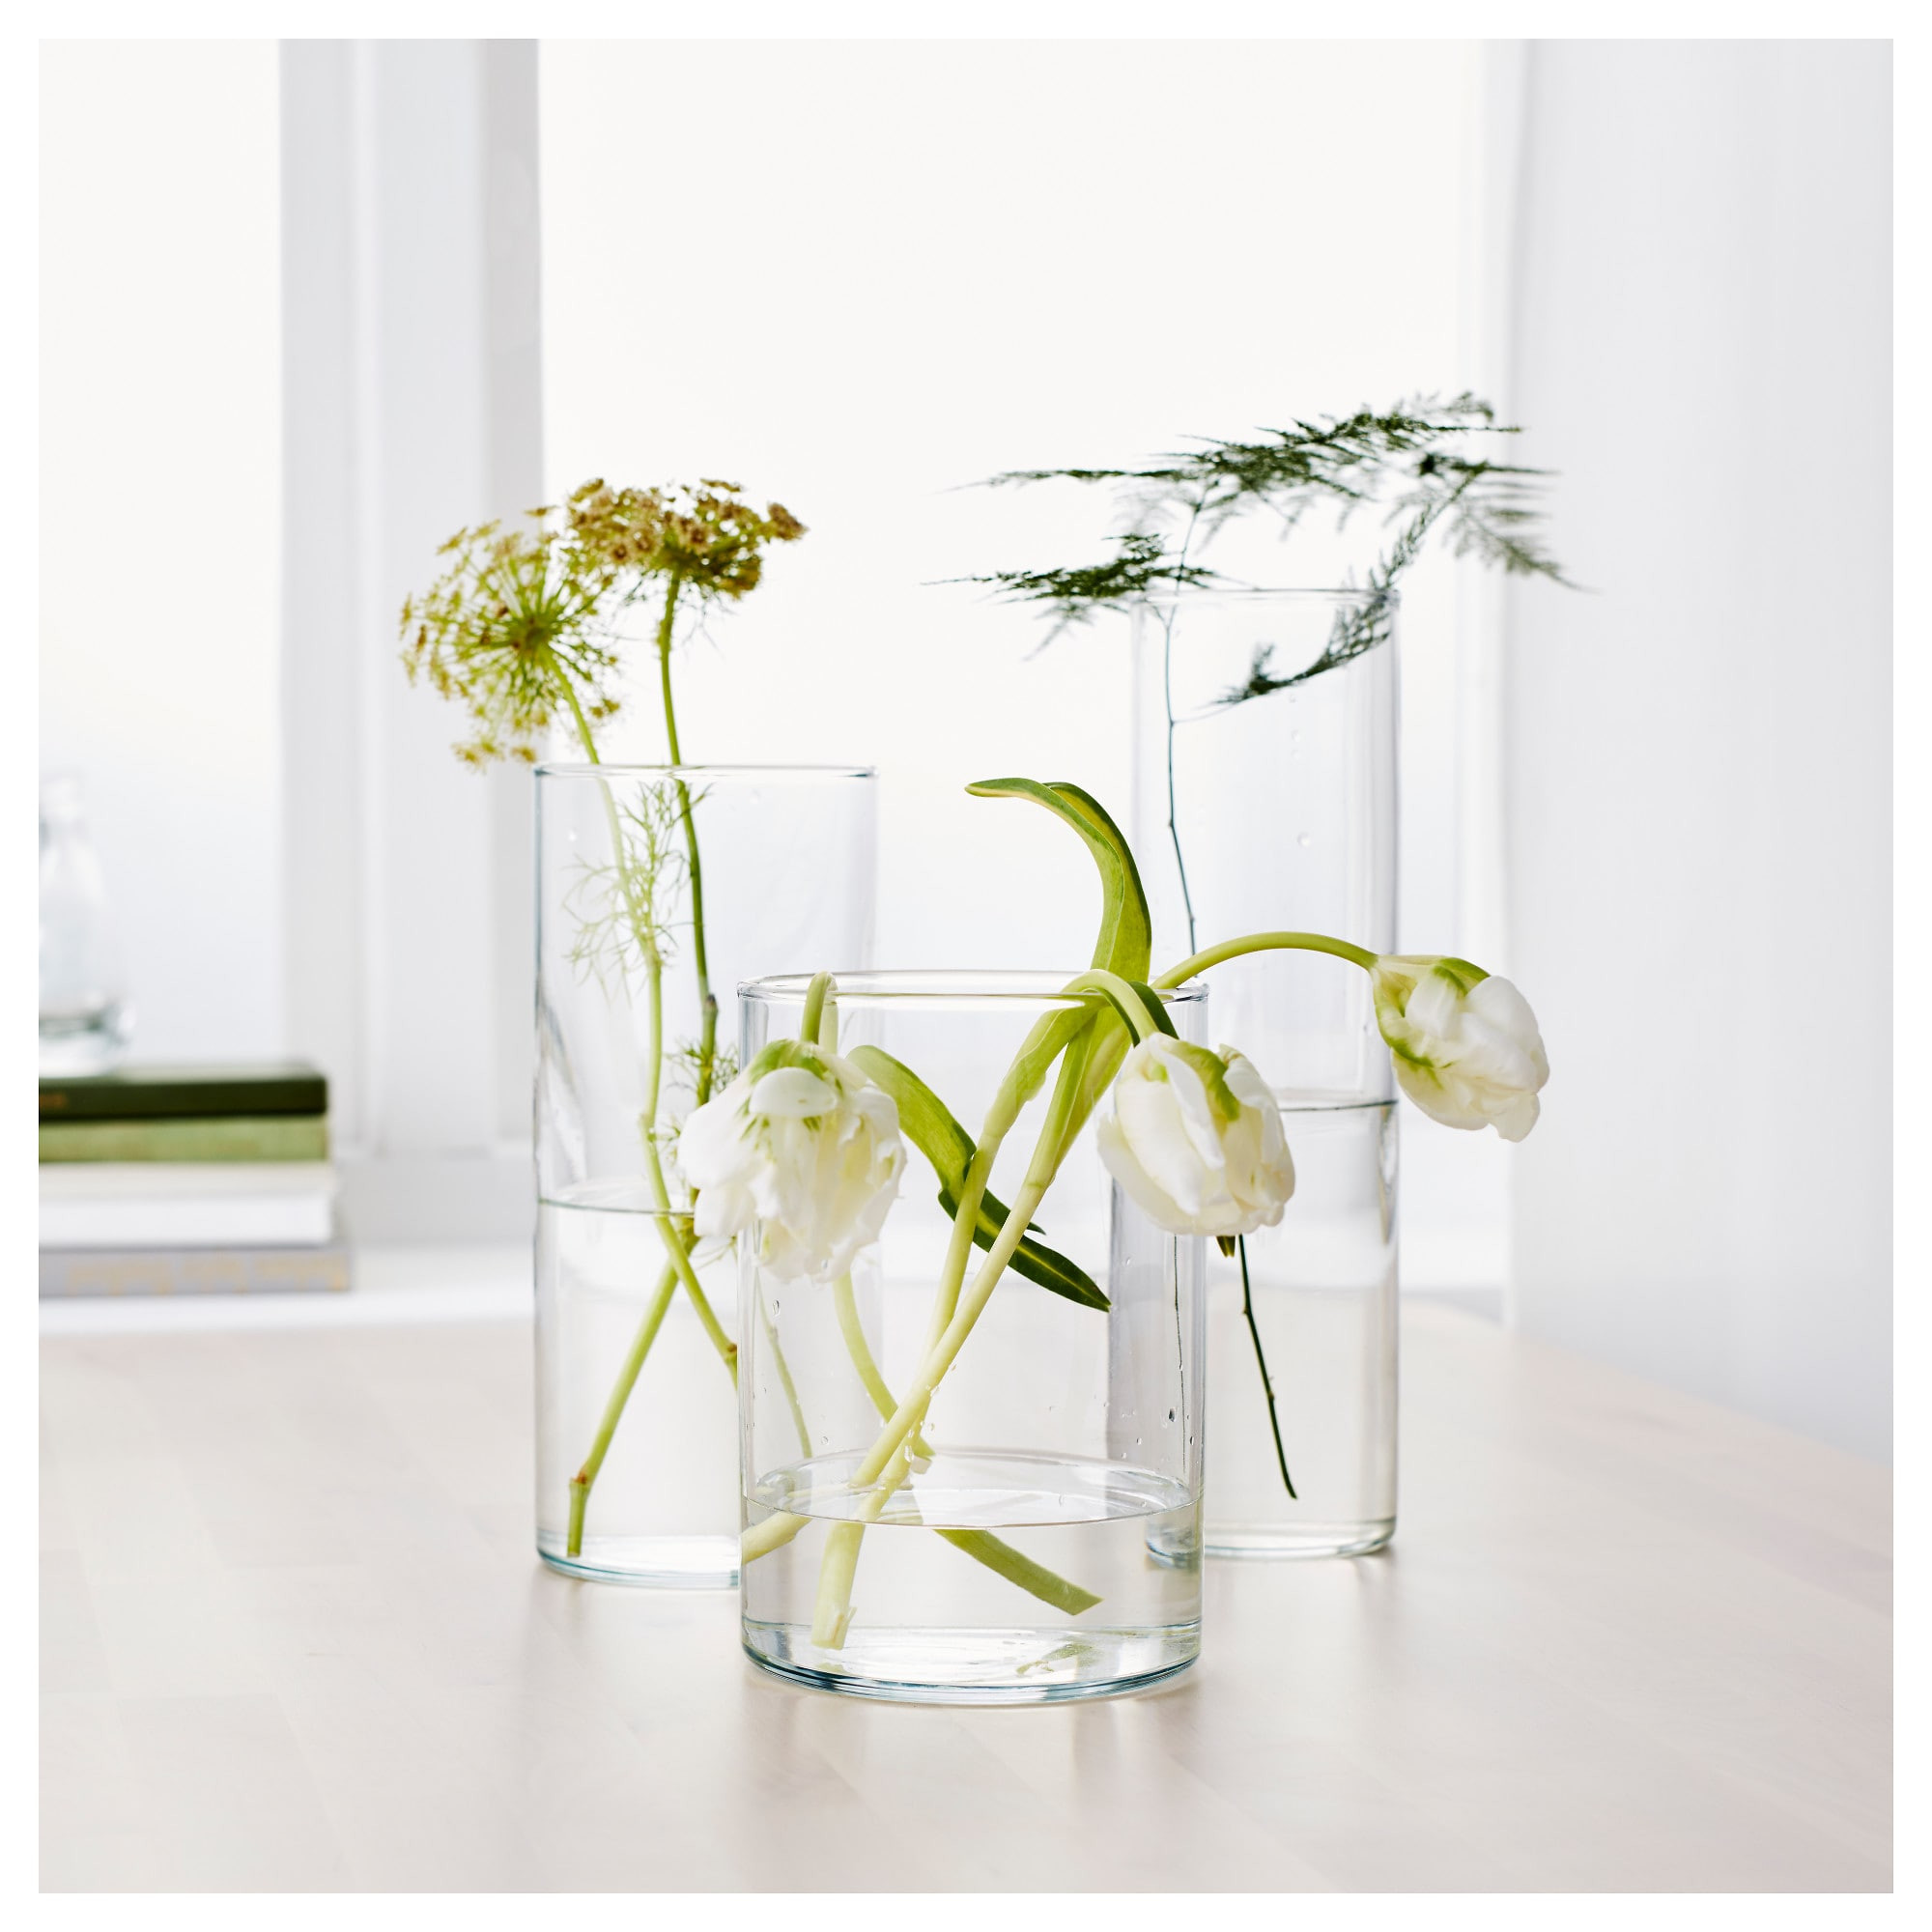 10 Amazing Tall Cylinder Vases Set Of 3 2023 free download tall cylinder vases set of 3 of cylinder vase set of 3 ikea for 0429902 pe584265 s5 jpg